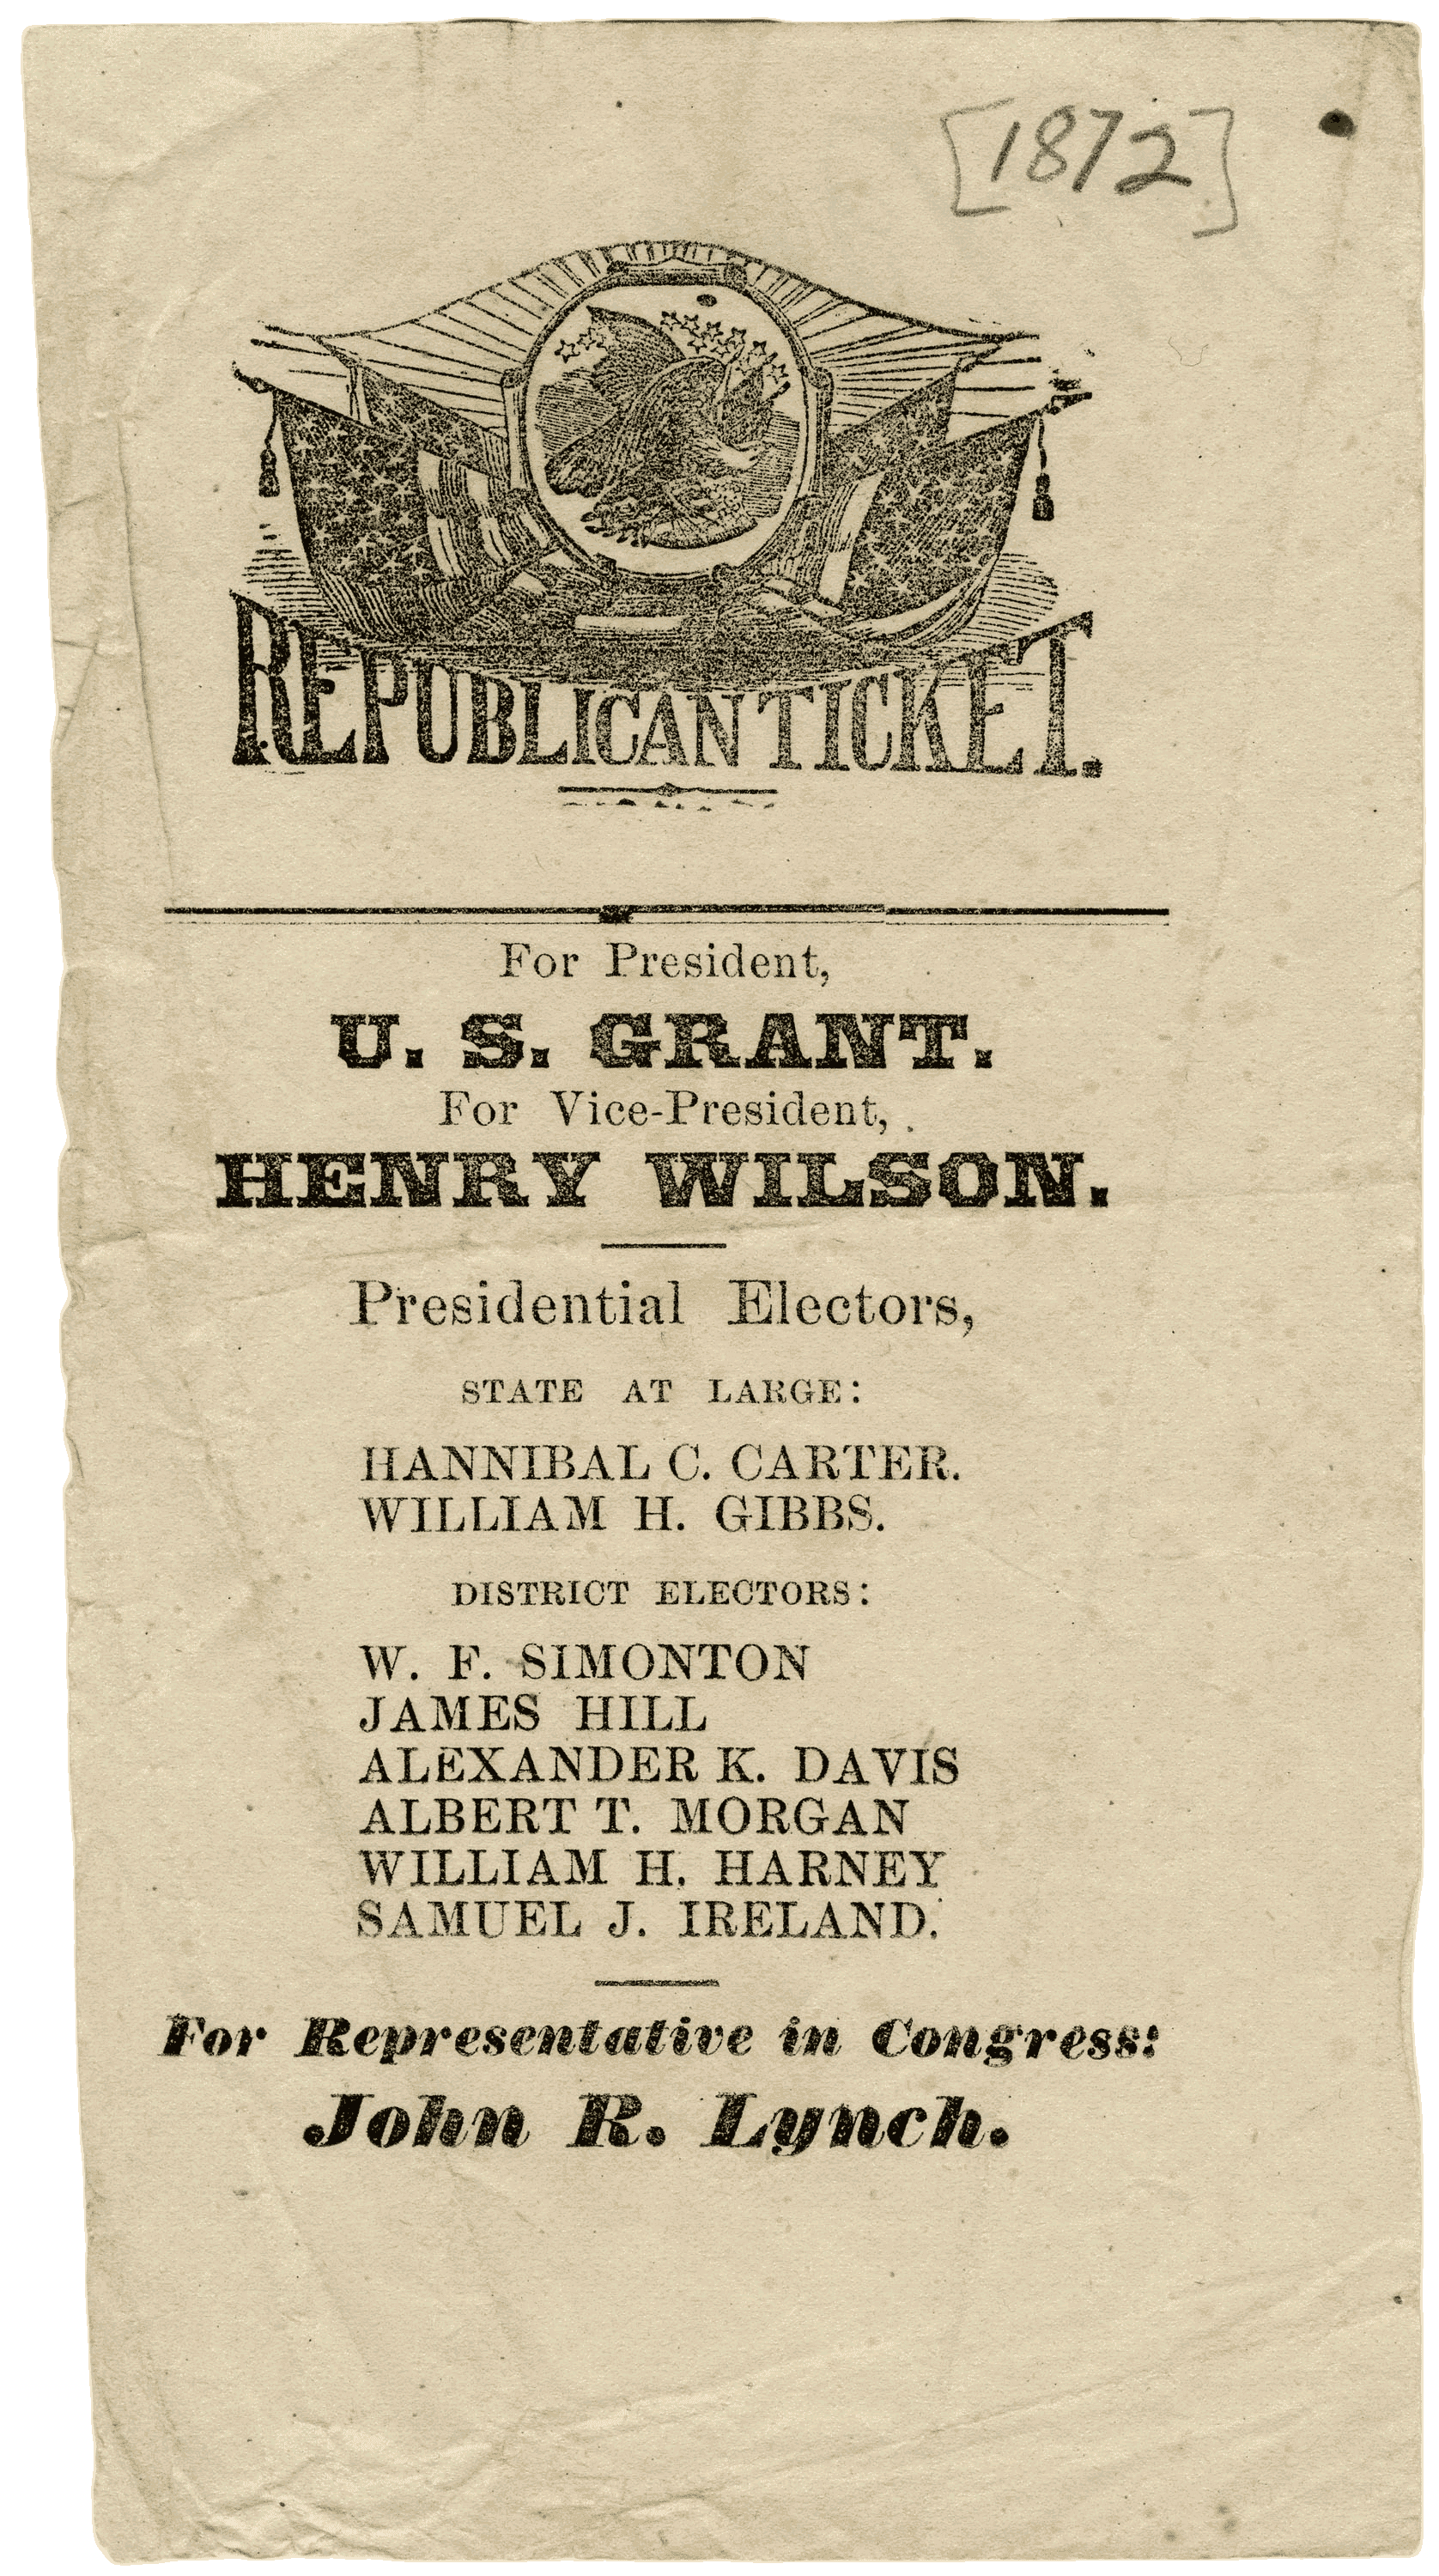 Printed political flyer showing Republican Ticket [1872] REPUBLICAN TICKET. For President, U. S. GRANT. For Vice-President, HENRY WILSON. Presidential Electors, STATE AT LARGE: HANNIBAL C. CARTER. WILLIAM H. GIBBS. DISTRICT ELECTORS: W. F. SIMONTON JAMES HILL ALEXANDER K. DAVIS ALBERT T. MORGAN WILLIAM H. HARNEY SAMUEL J. IRELAND. For Representative in Congress: John R. Lynch.